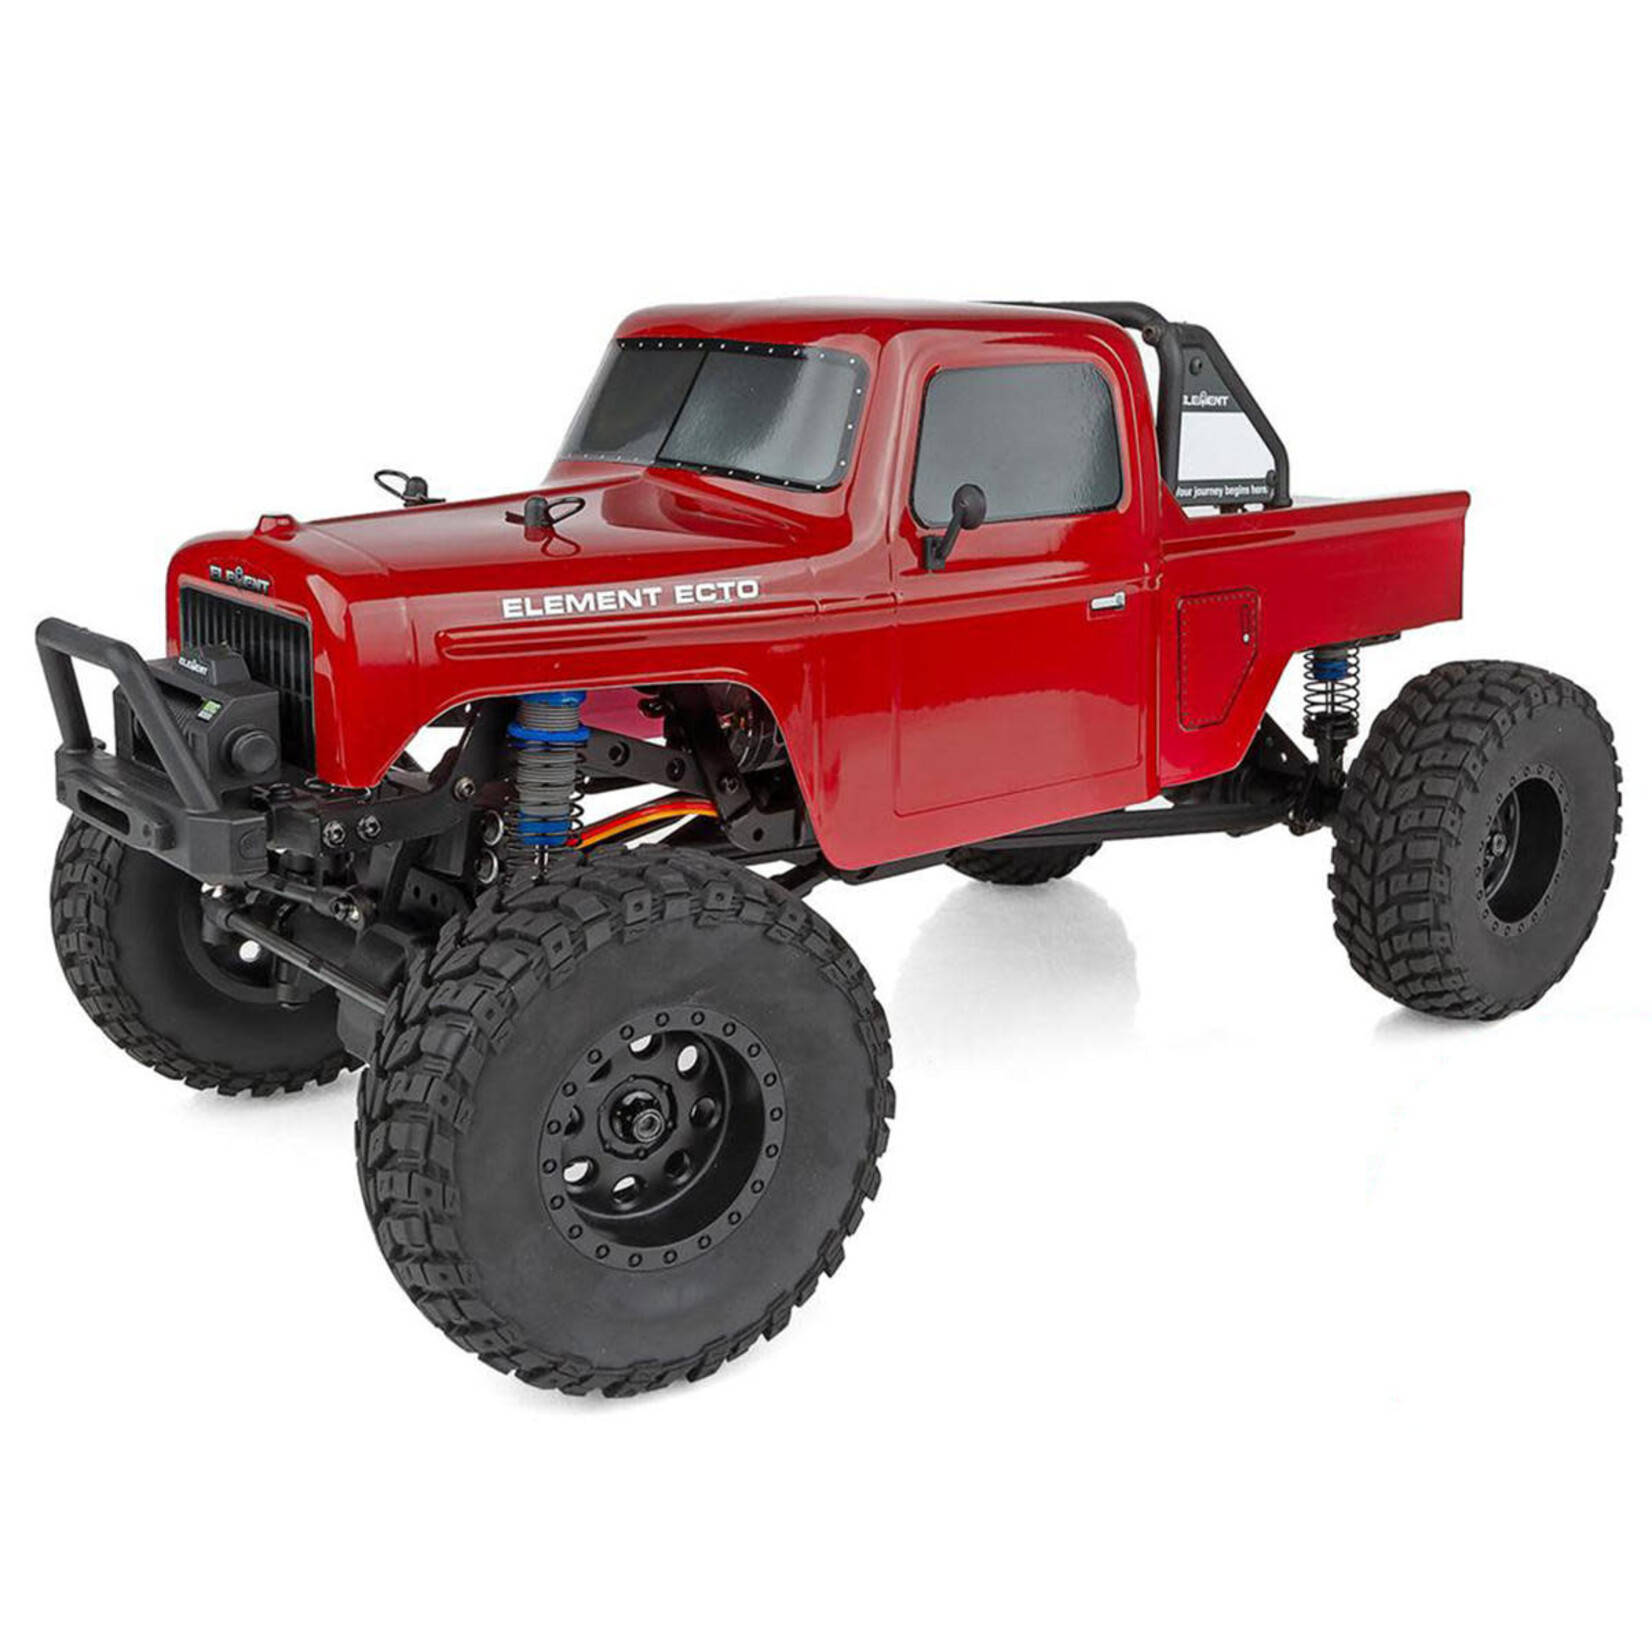 Element RC Element RC Enduro12 Ecto 1/12 4WD RTR Scale Mini Trail Truck w/2.4GHz Radio, Battery & Charger #40010C